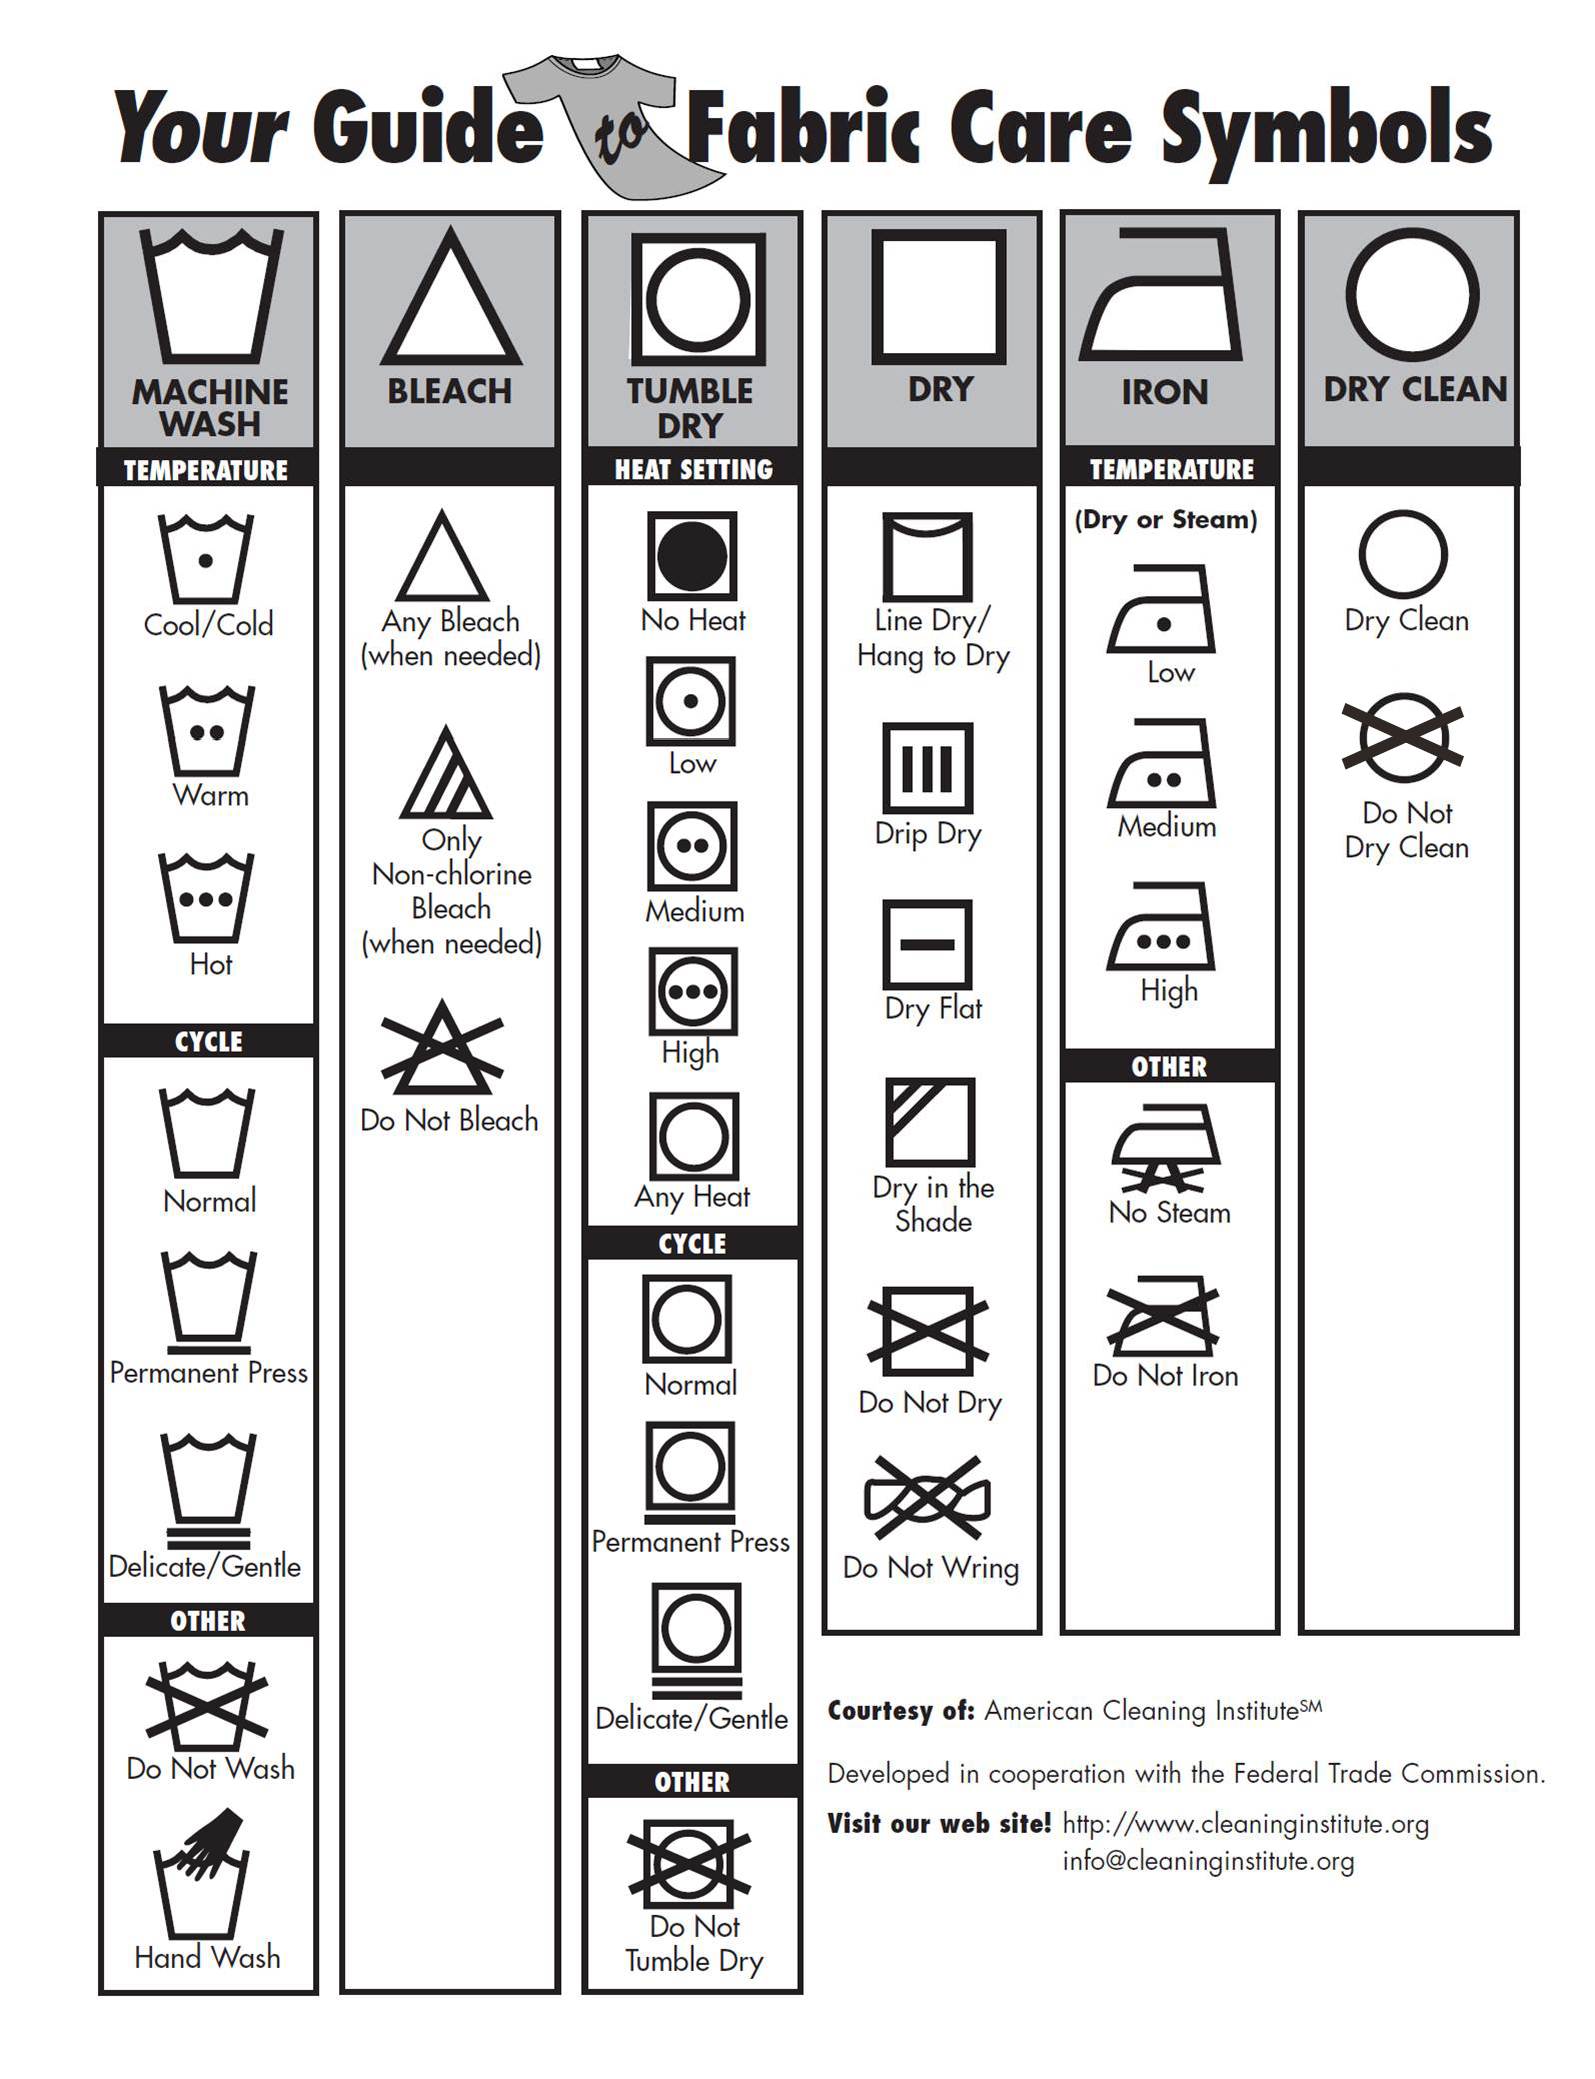 Do You Follow The Care Instructions On Your Clothes Tags?